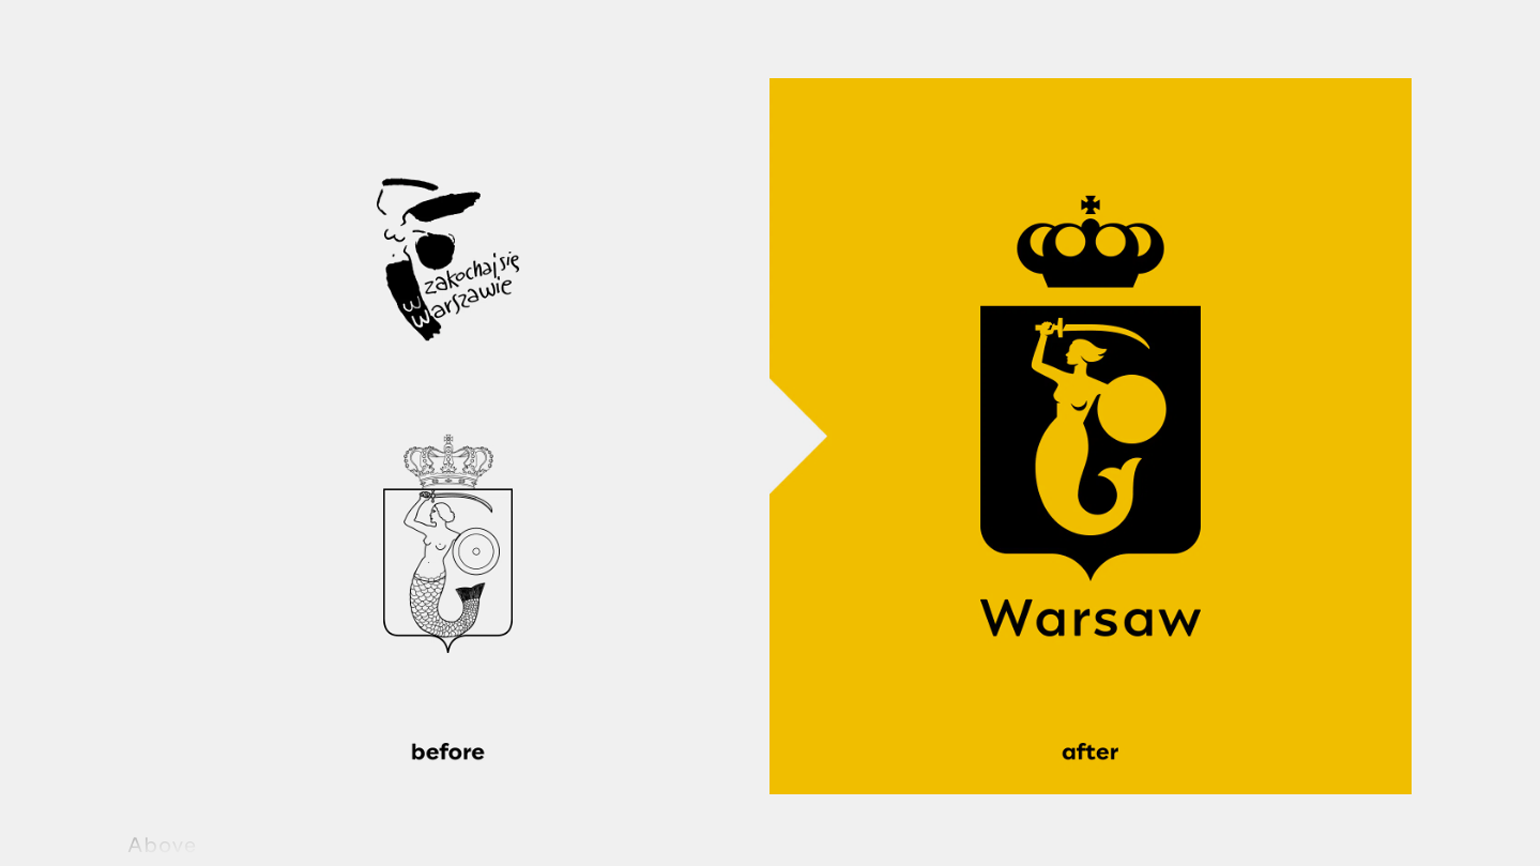 The old logo and coat of arms and the new logo of Warsaw